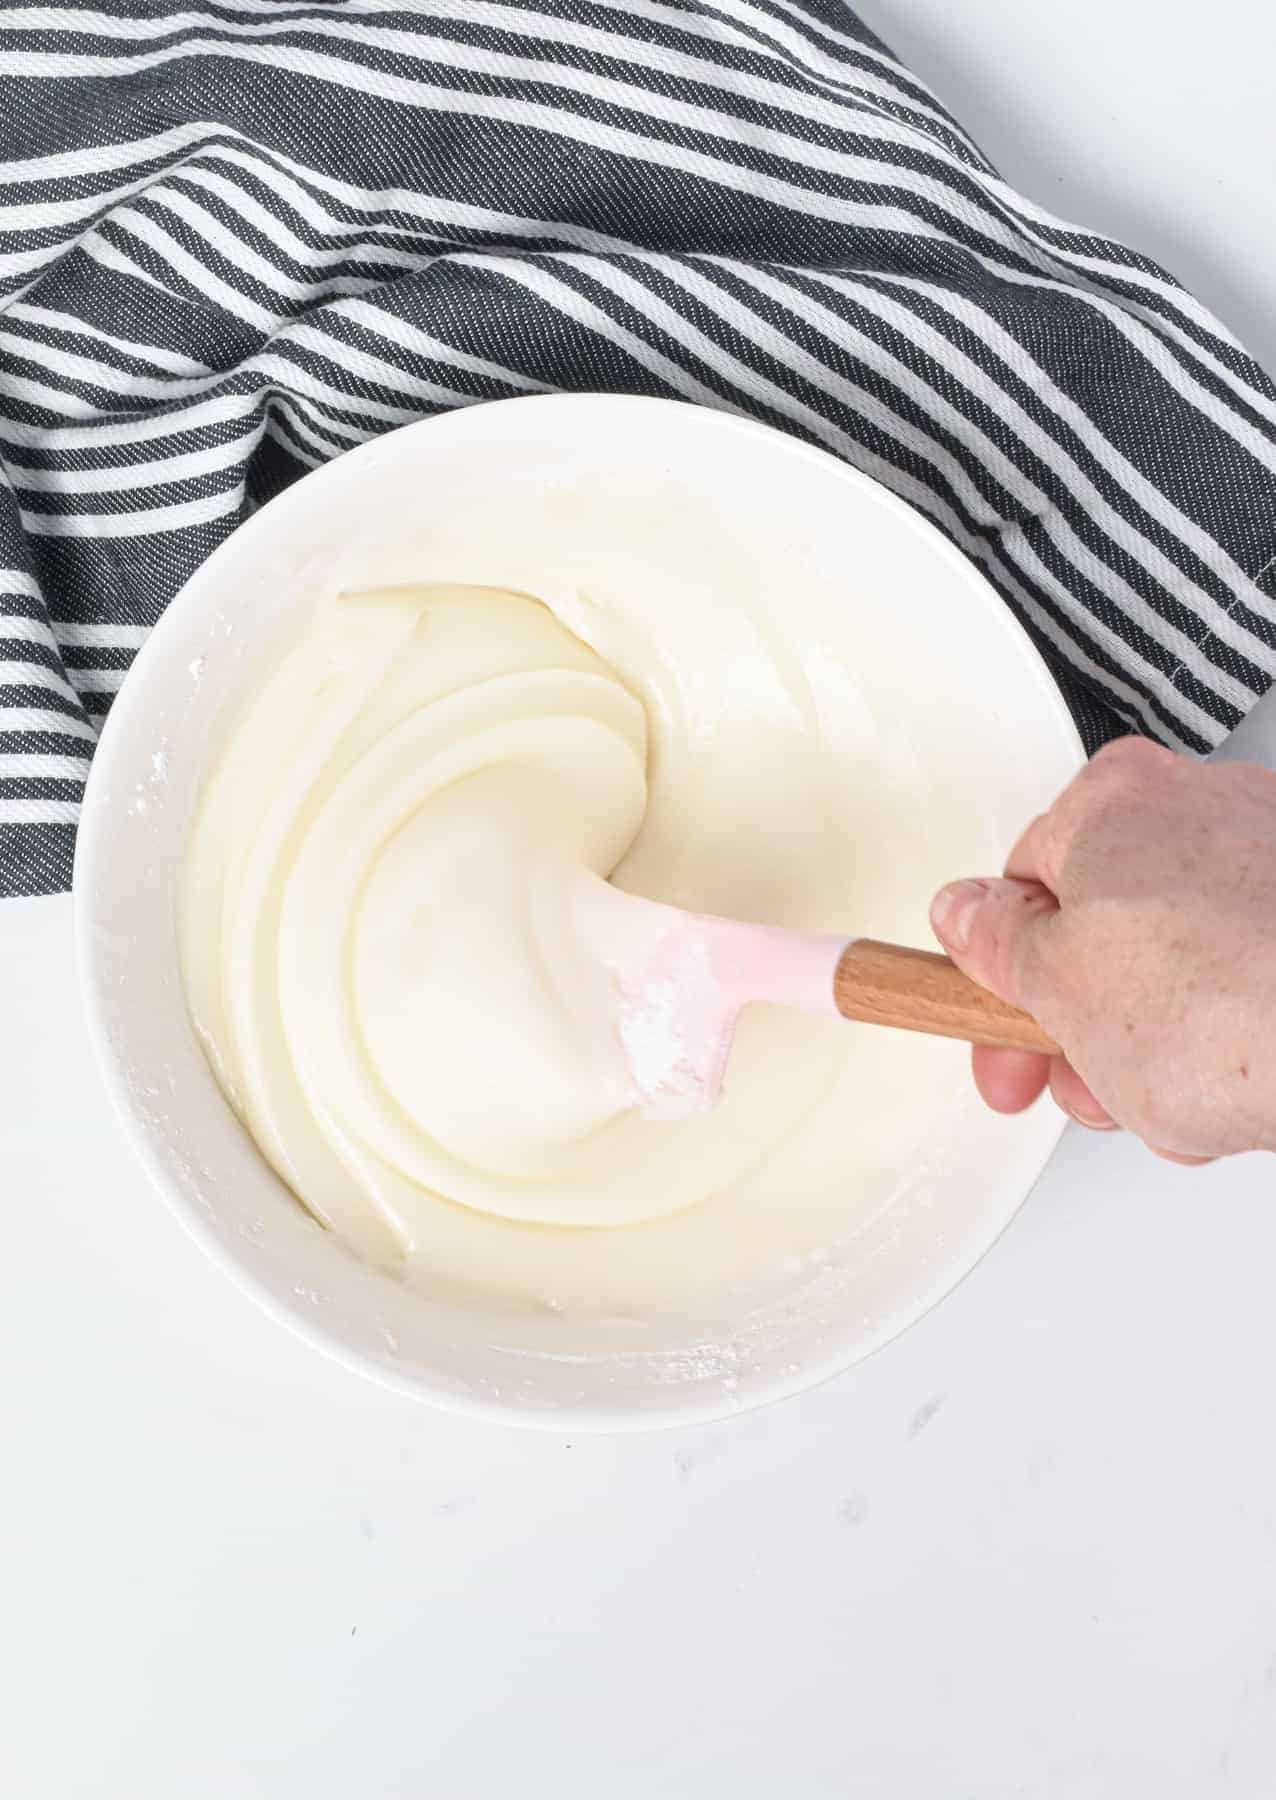 Vegan Royal Icing in a large bowl being stirred with a silicone spatula.